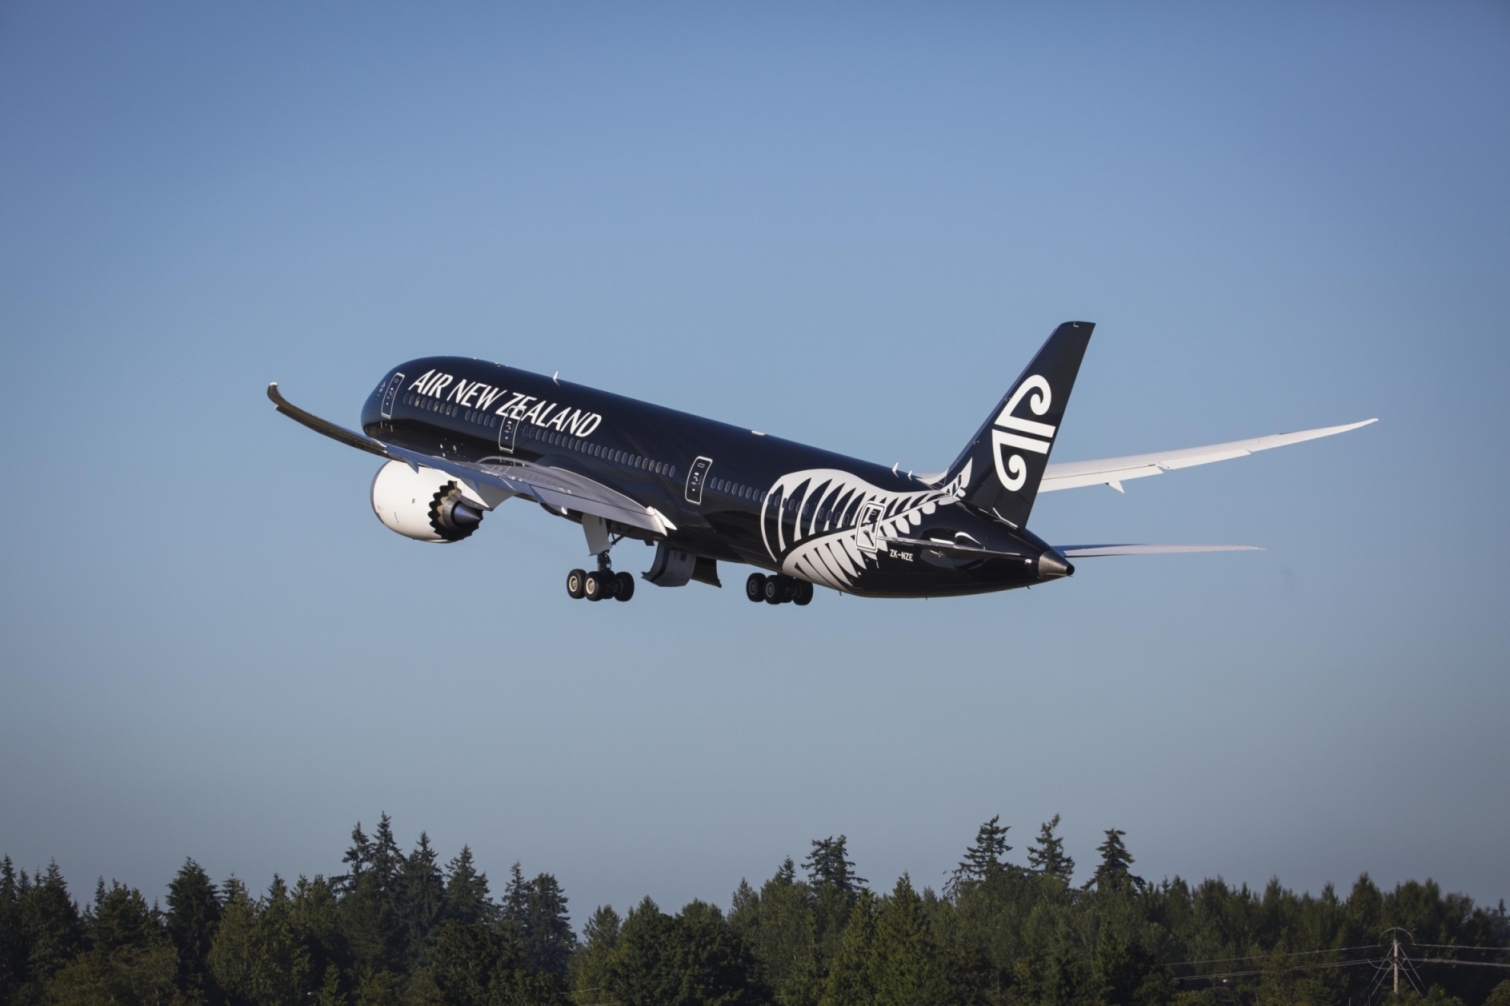 Air New Zealand continues to operate direct flight to Vietnam